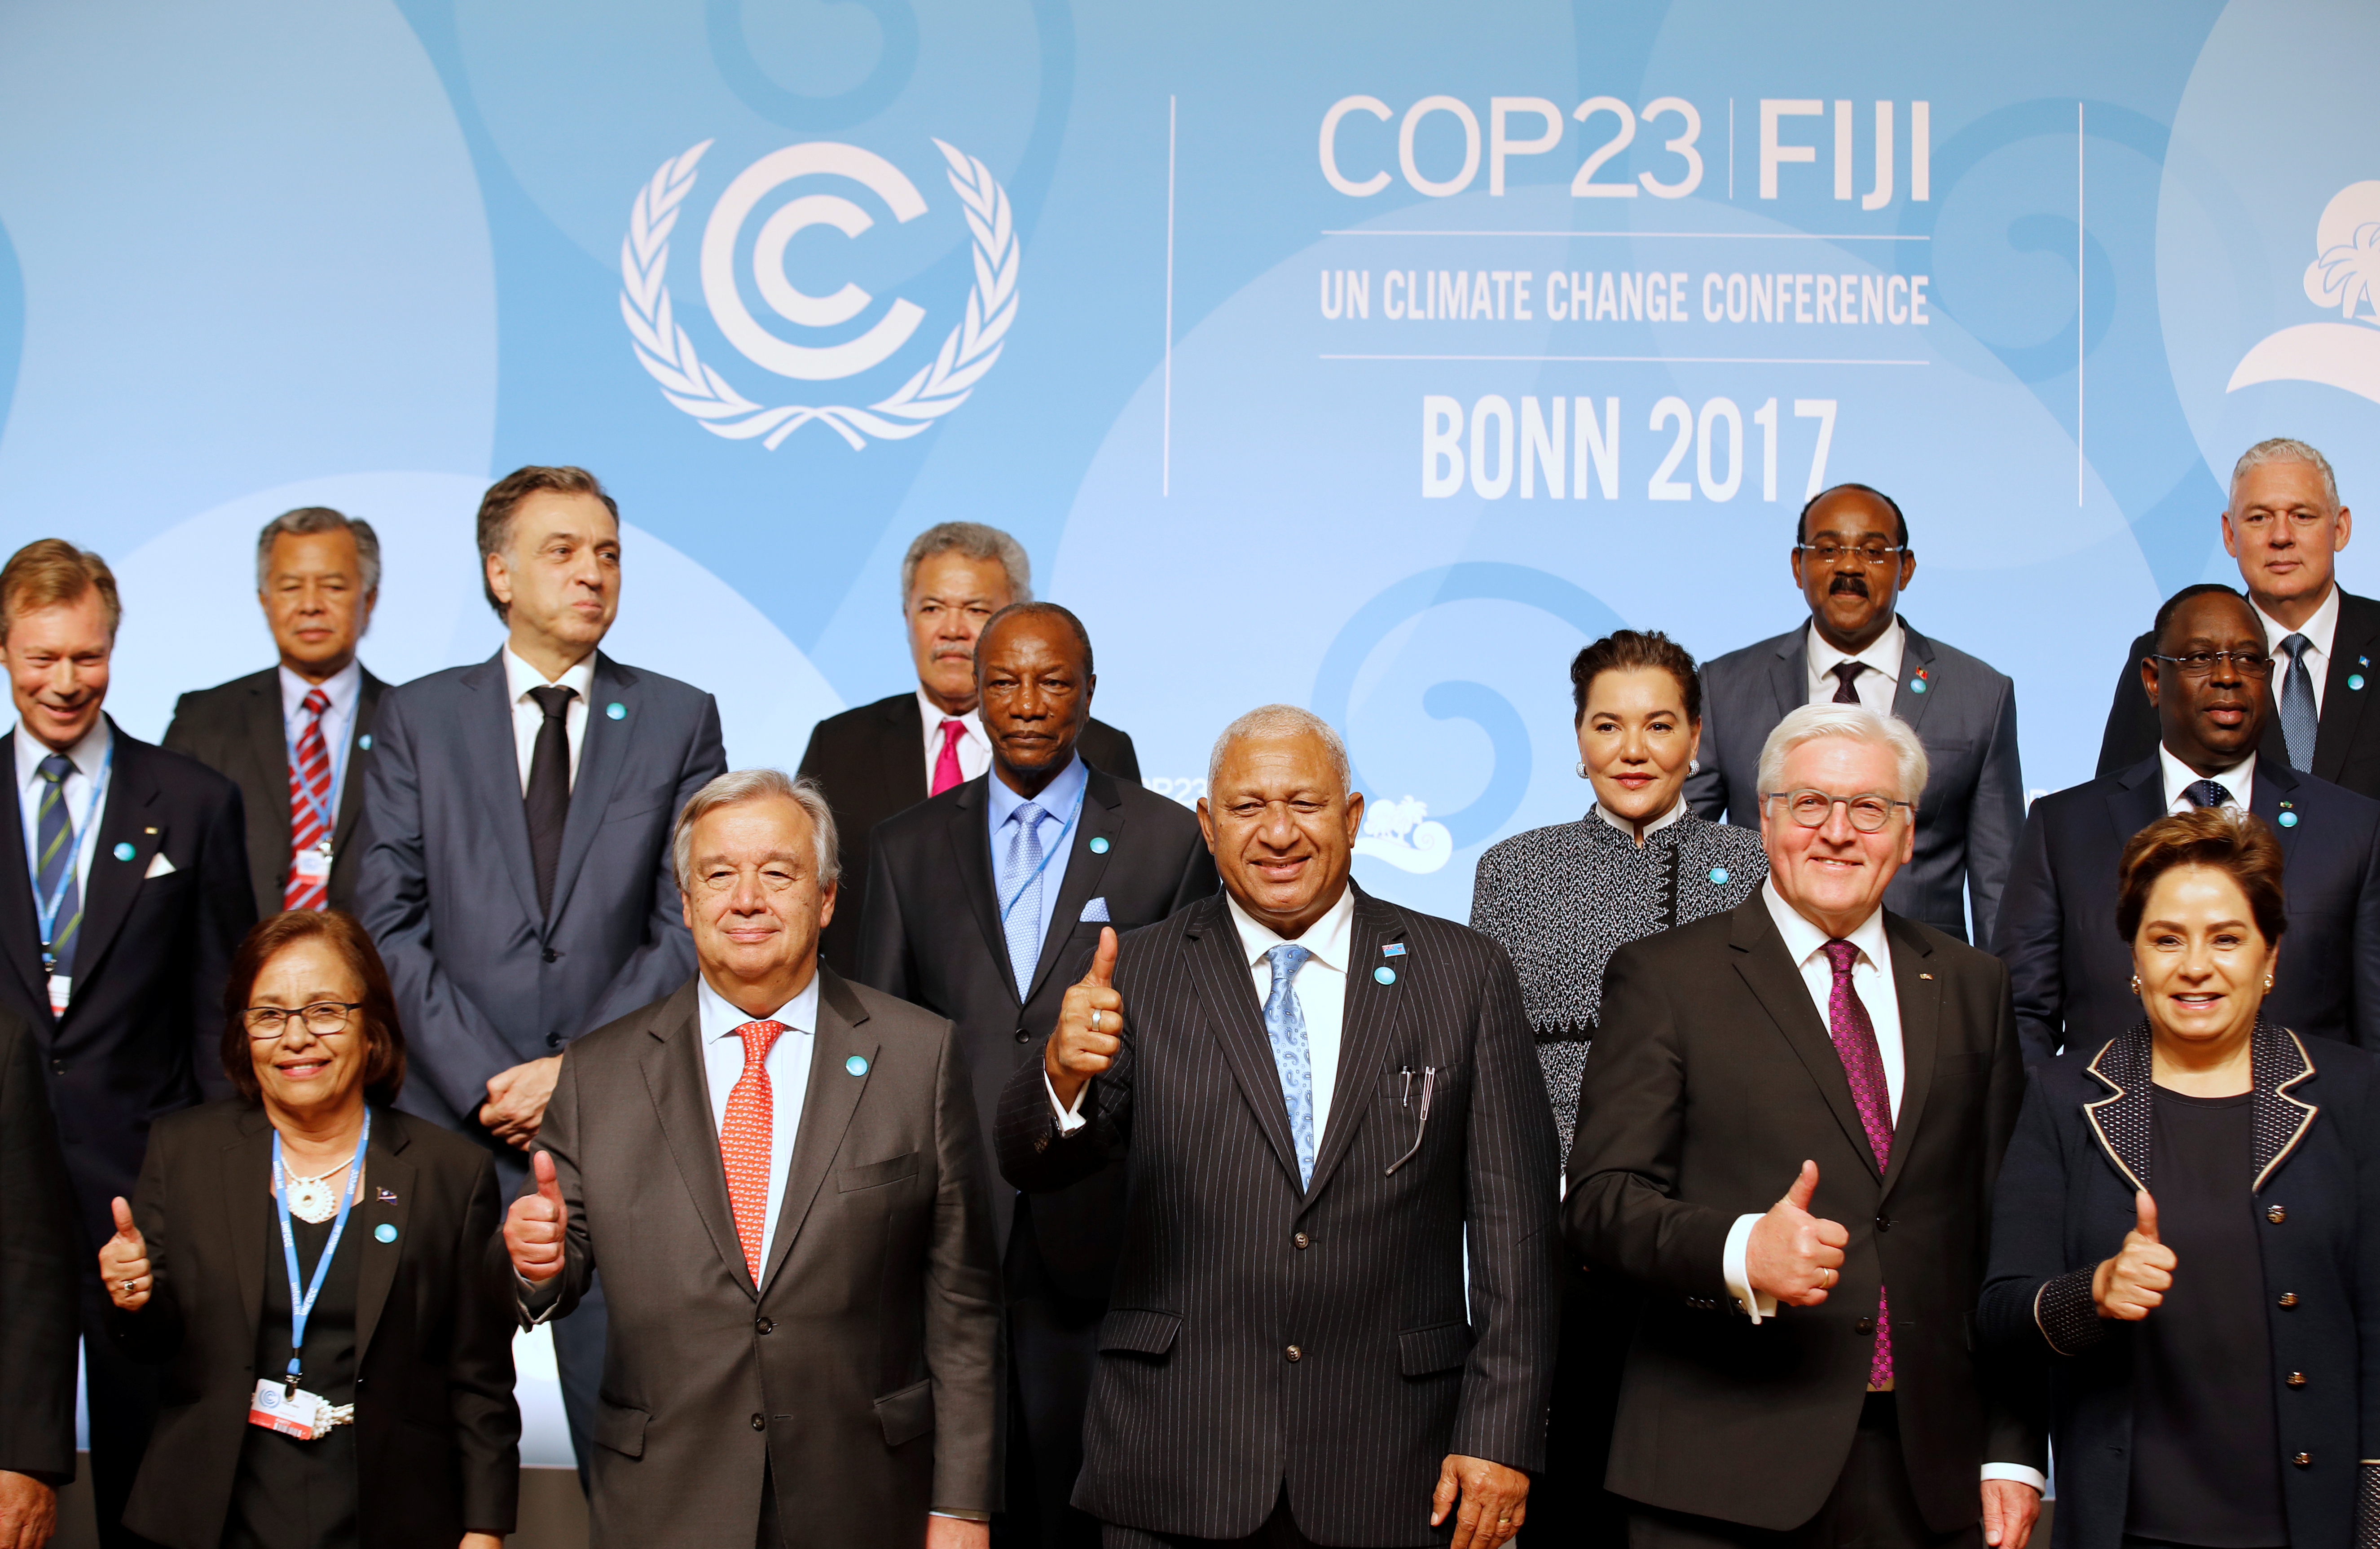 German President Frank-Walter Steinmeier, COP23 President Prime Minister Frank Bainimarama of Fiji, U.N. Secretary-General Antonio Guterres, Patricia Espinosa, Executive Secretary of the United Nations Framework Convention on Climate Change, pose for a family photo during COP23 U.N. Climate Change Conference in Bonn, Germany, November 15, 2017.  REUTERS/Wolfgang Rattay - RC15F82CCBD0